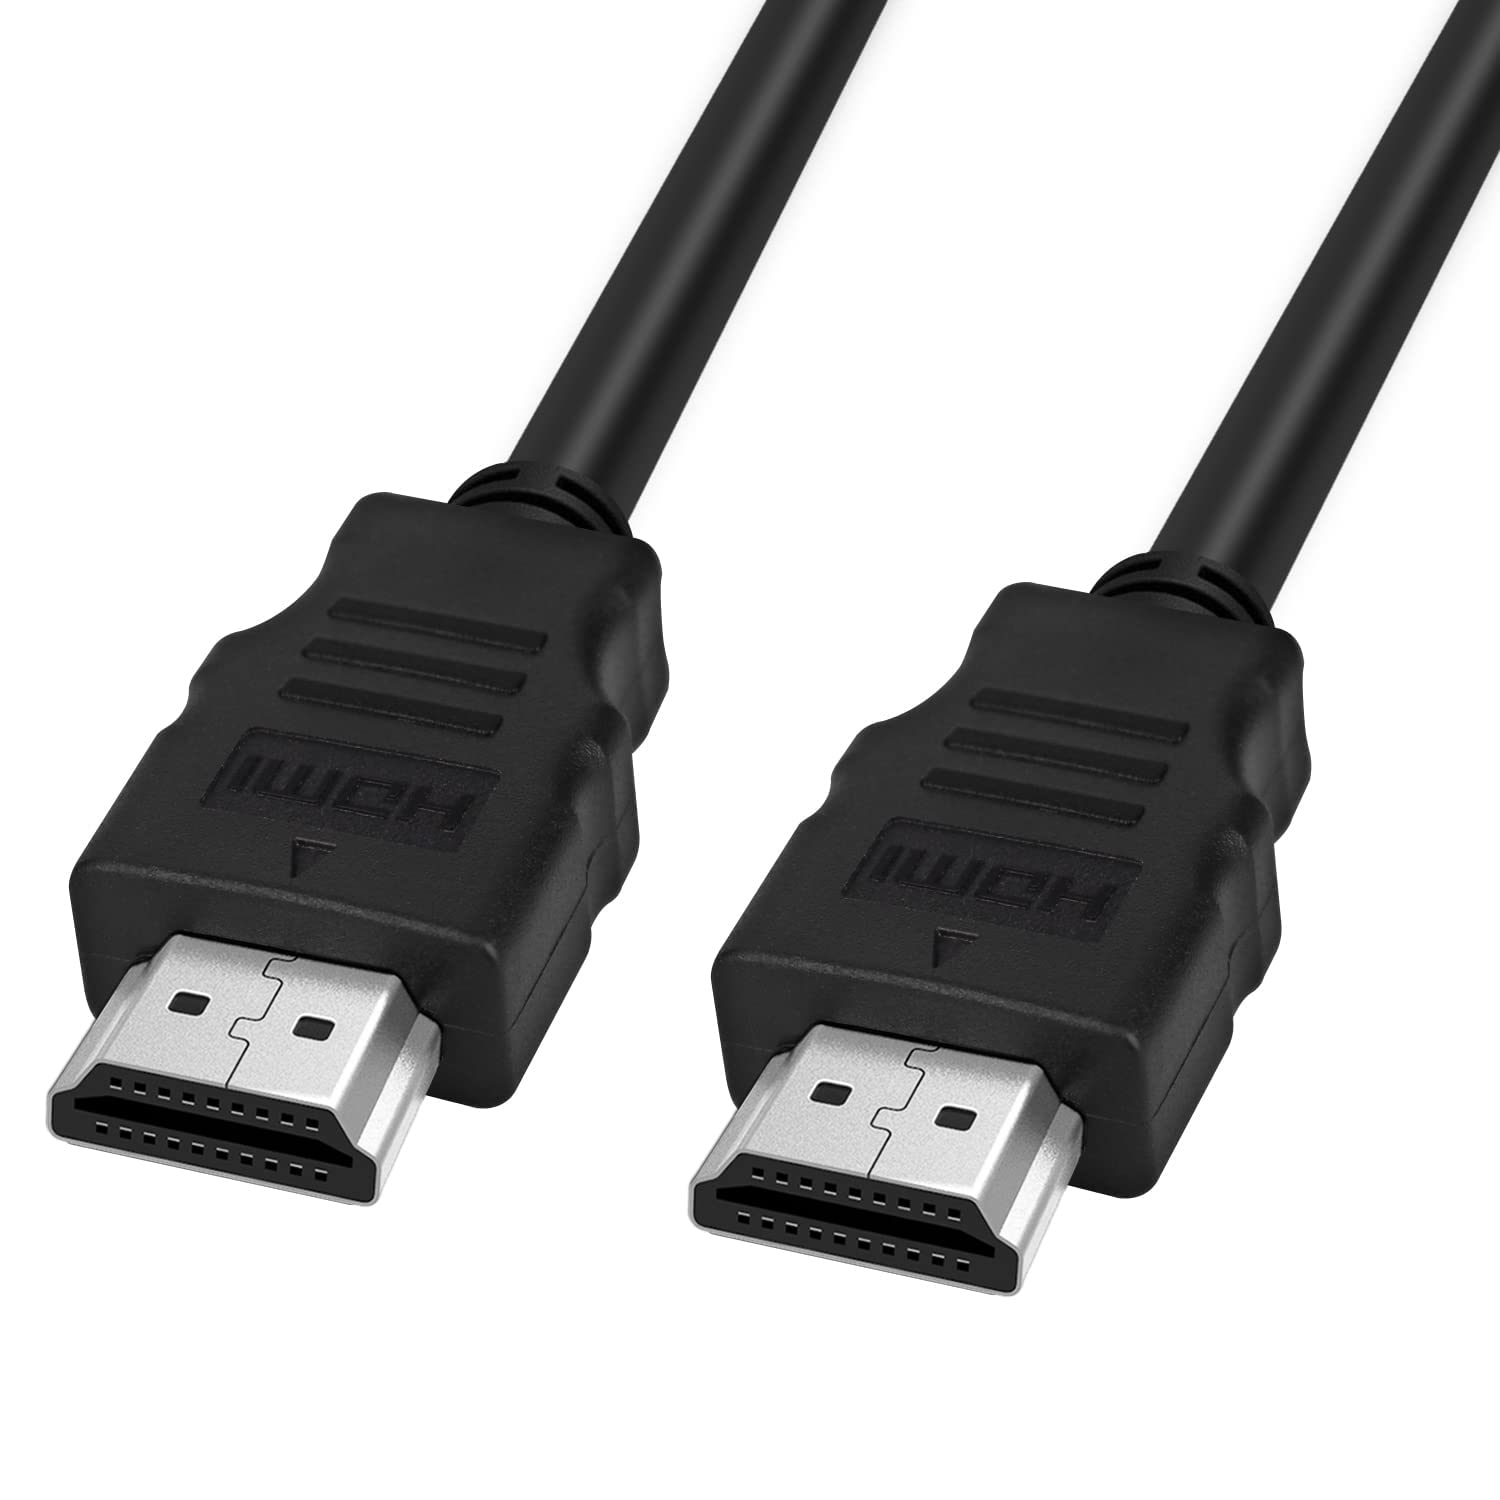 Tizum HDMI Cable 4K 10.2Gbps Ethernet Support 4K@24Hz for Laptop, PC, UHD TV, Xbox, PS4/5, Game Console - 1.5M